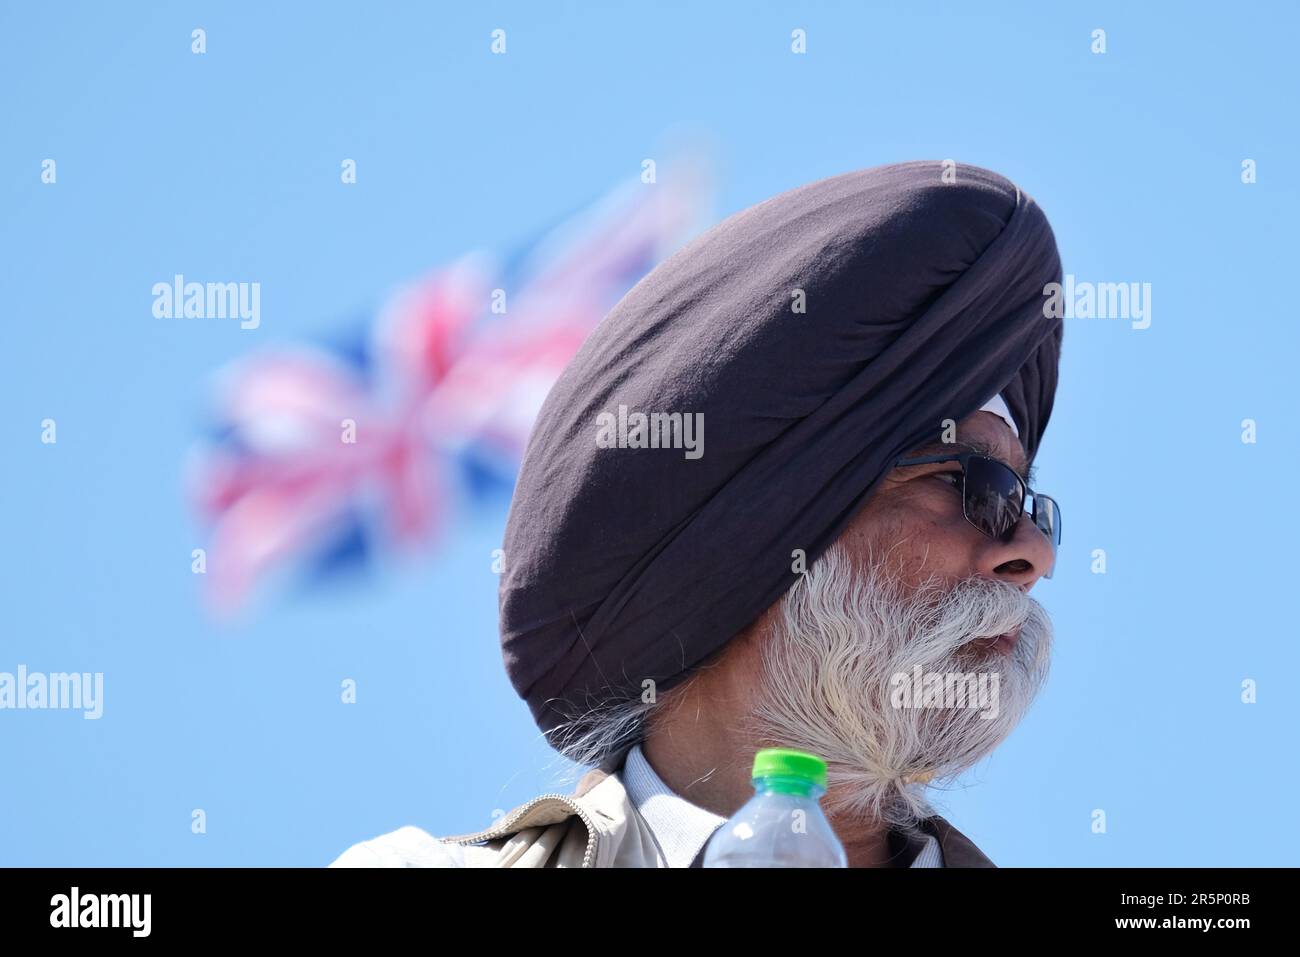 London, UK. A turbaned Sikh man with a Union flag seen flying in the background. Stock Photo